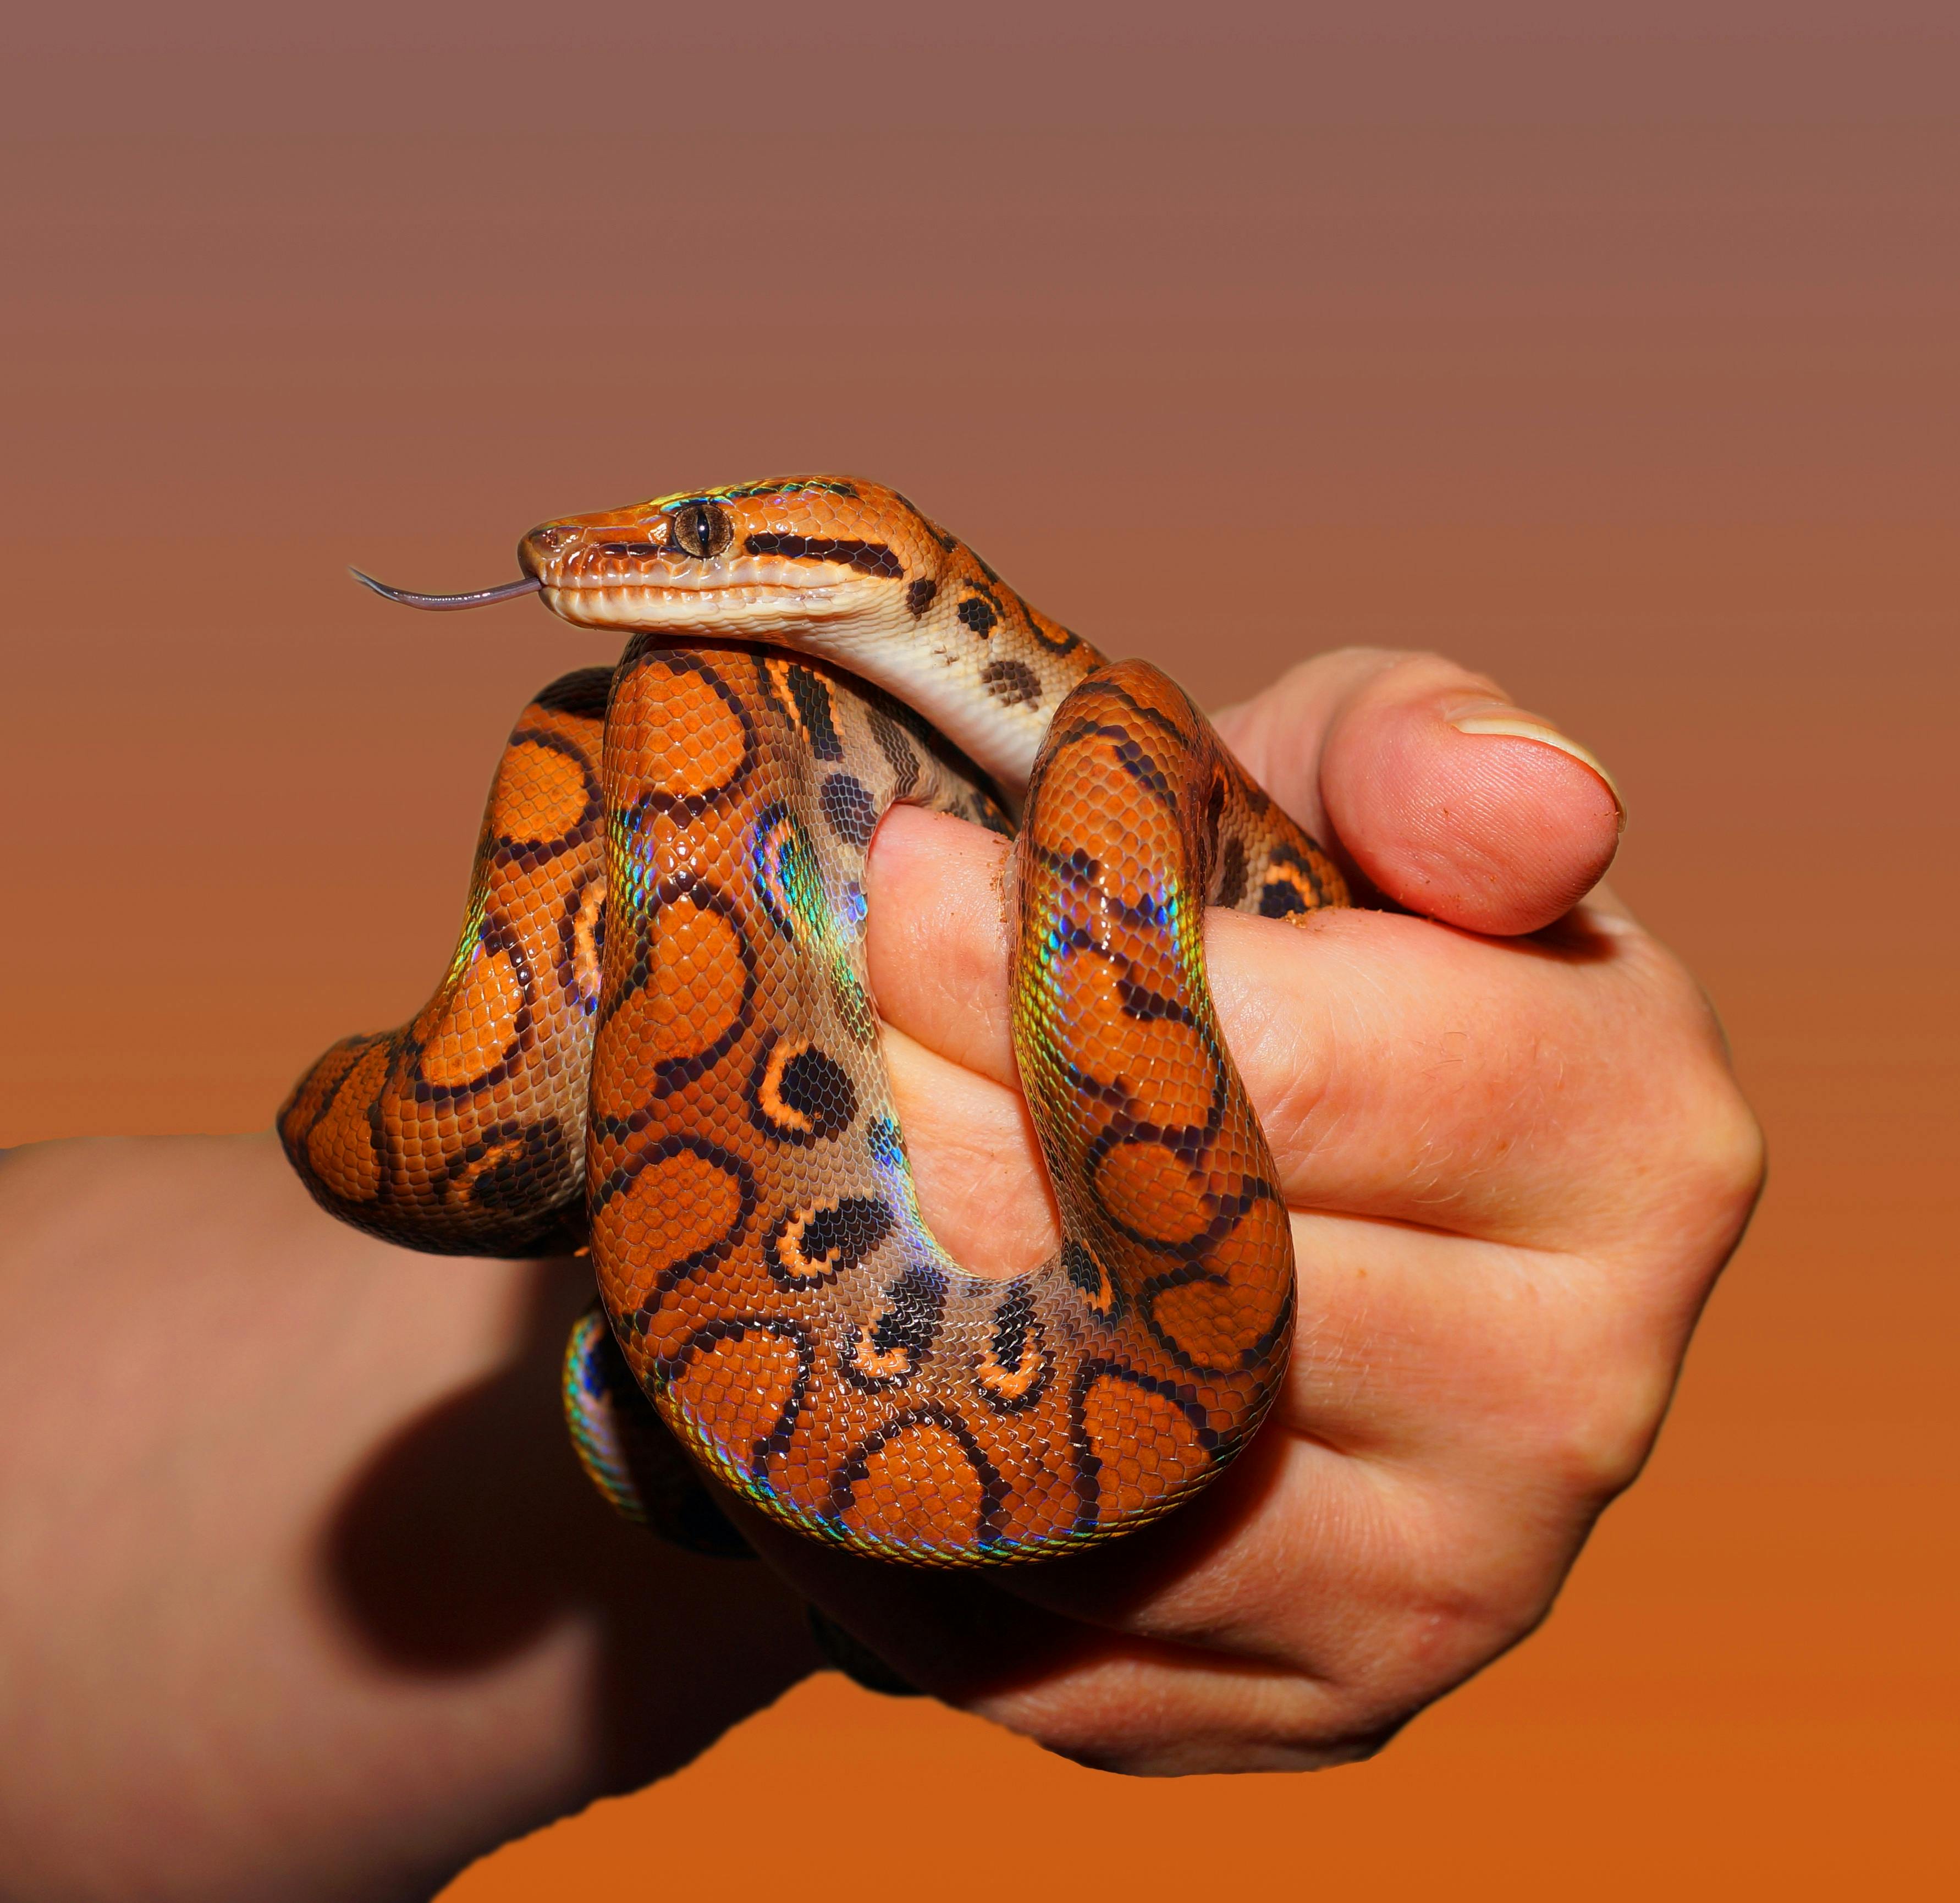 snake rainbow boa reptile scale.jpg?cs=srgb&dl=pexels pixabay 34426 Why Pet Snake Owners are Embracing the Slithery Trend!